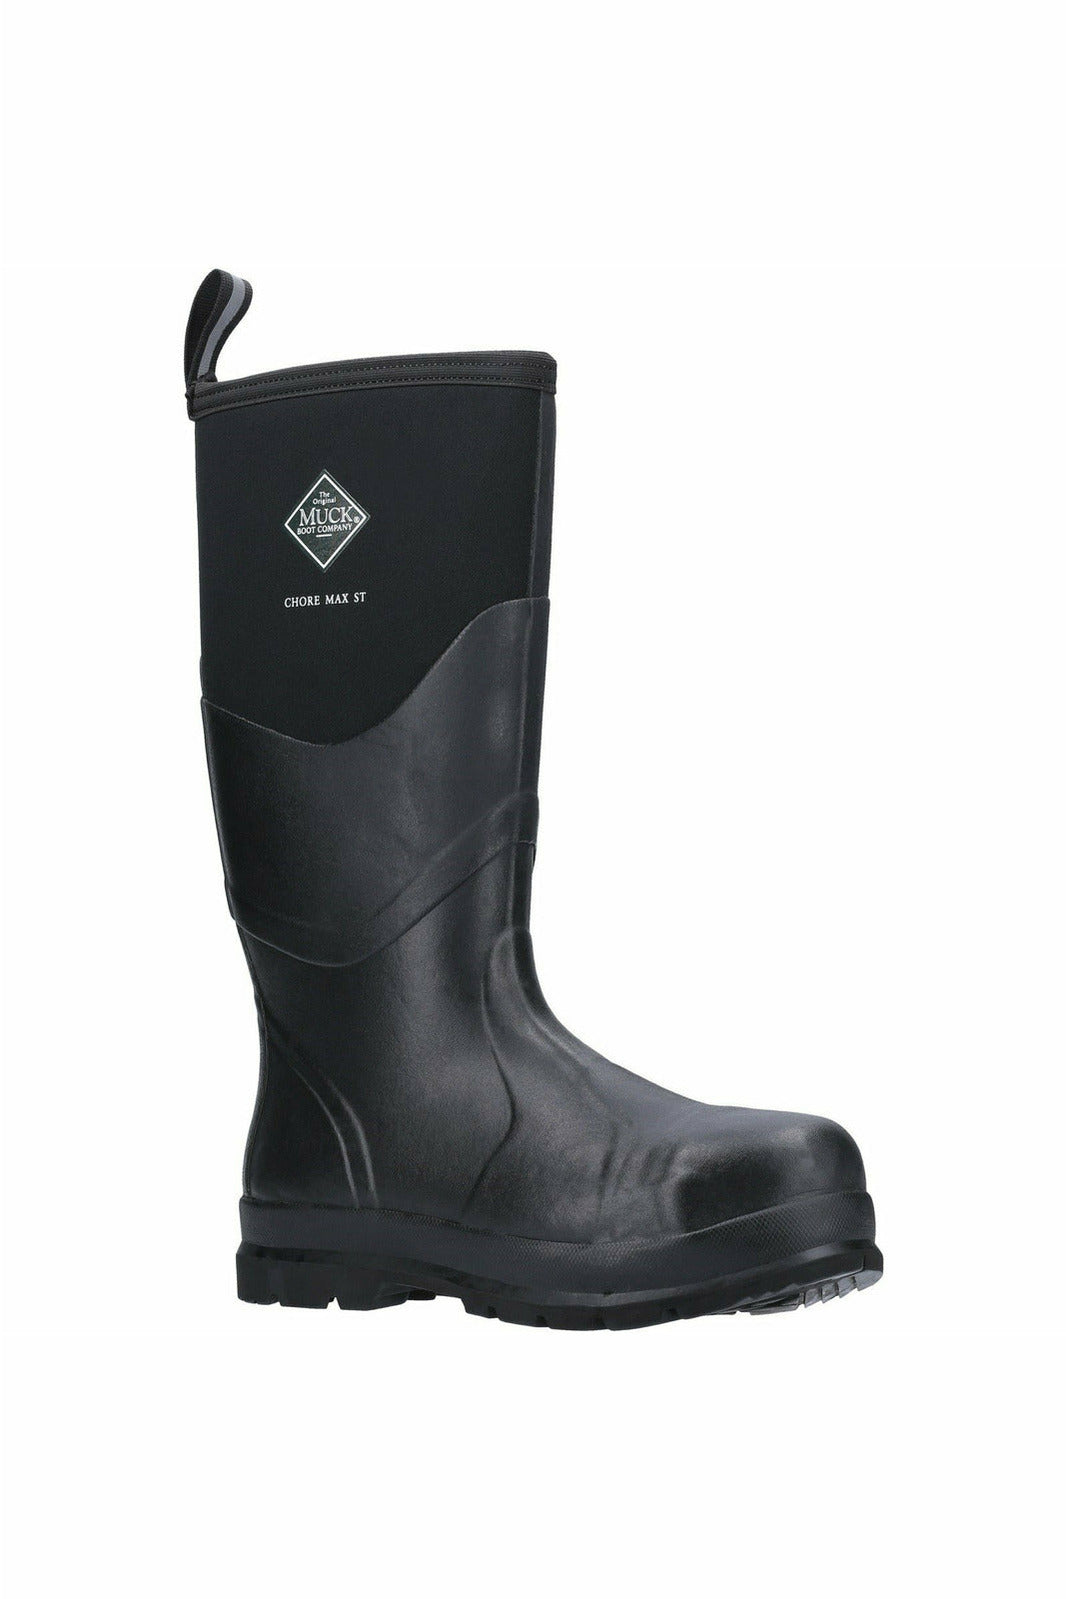 Muck Boots - Chore Max S5 Safety Wellington